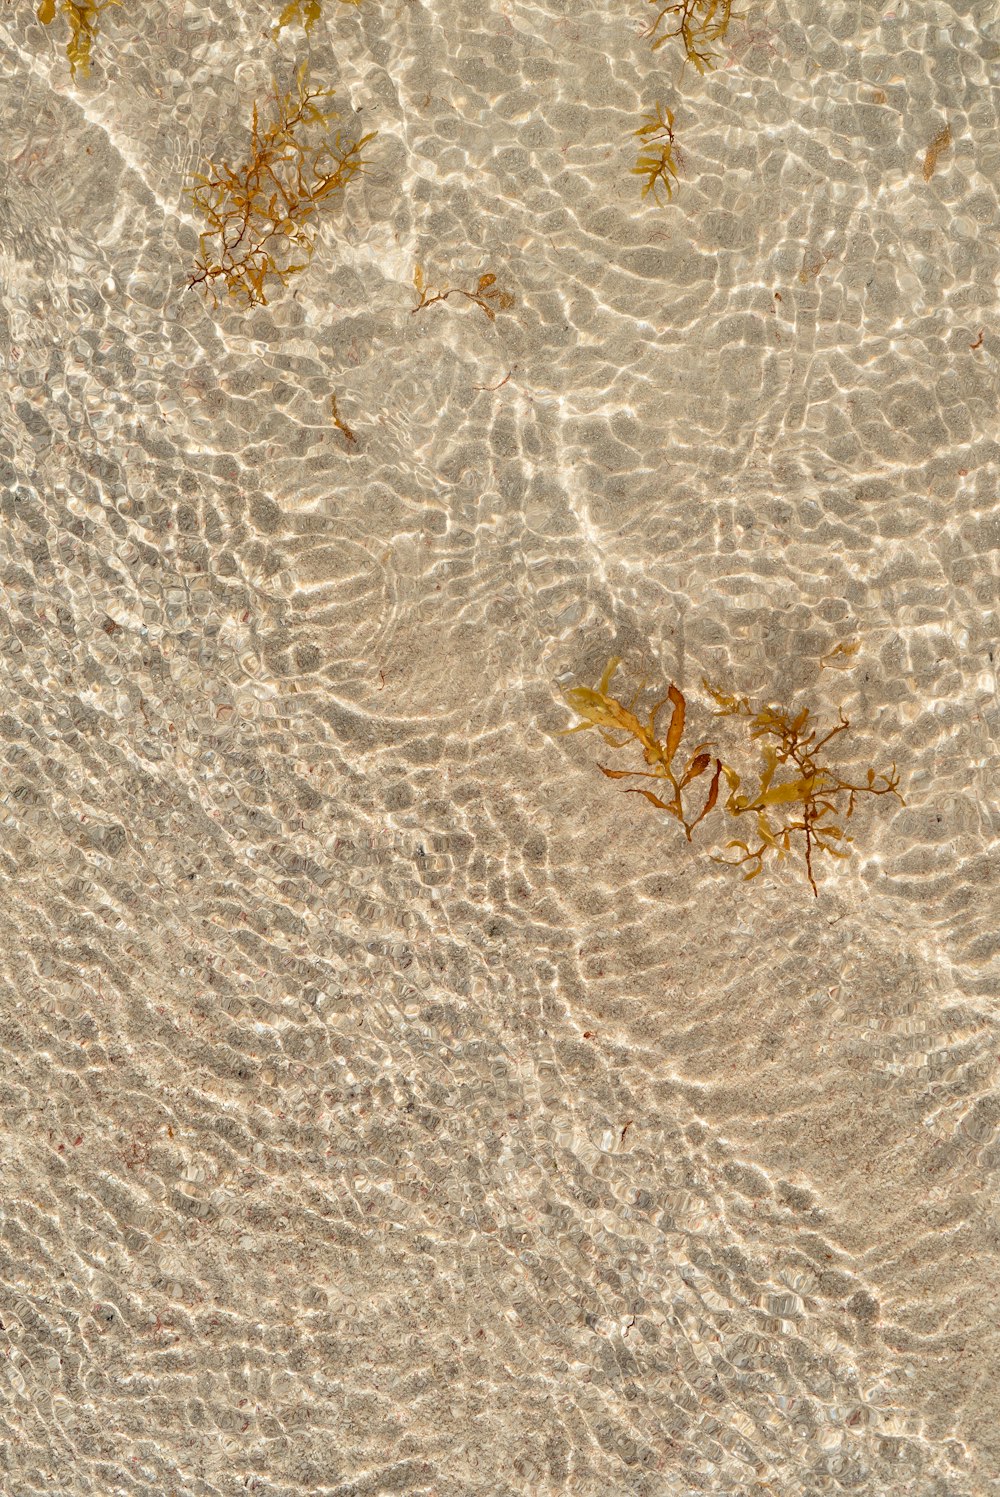 a group of seaweed floating on top of a sandy beach